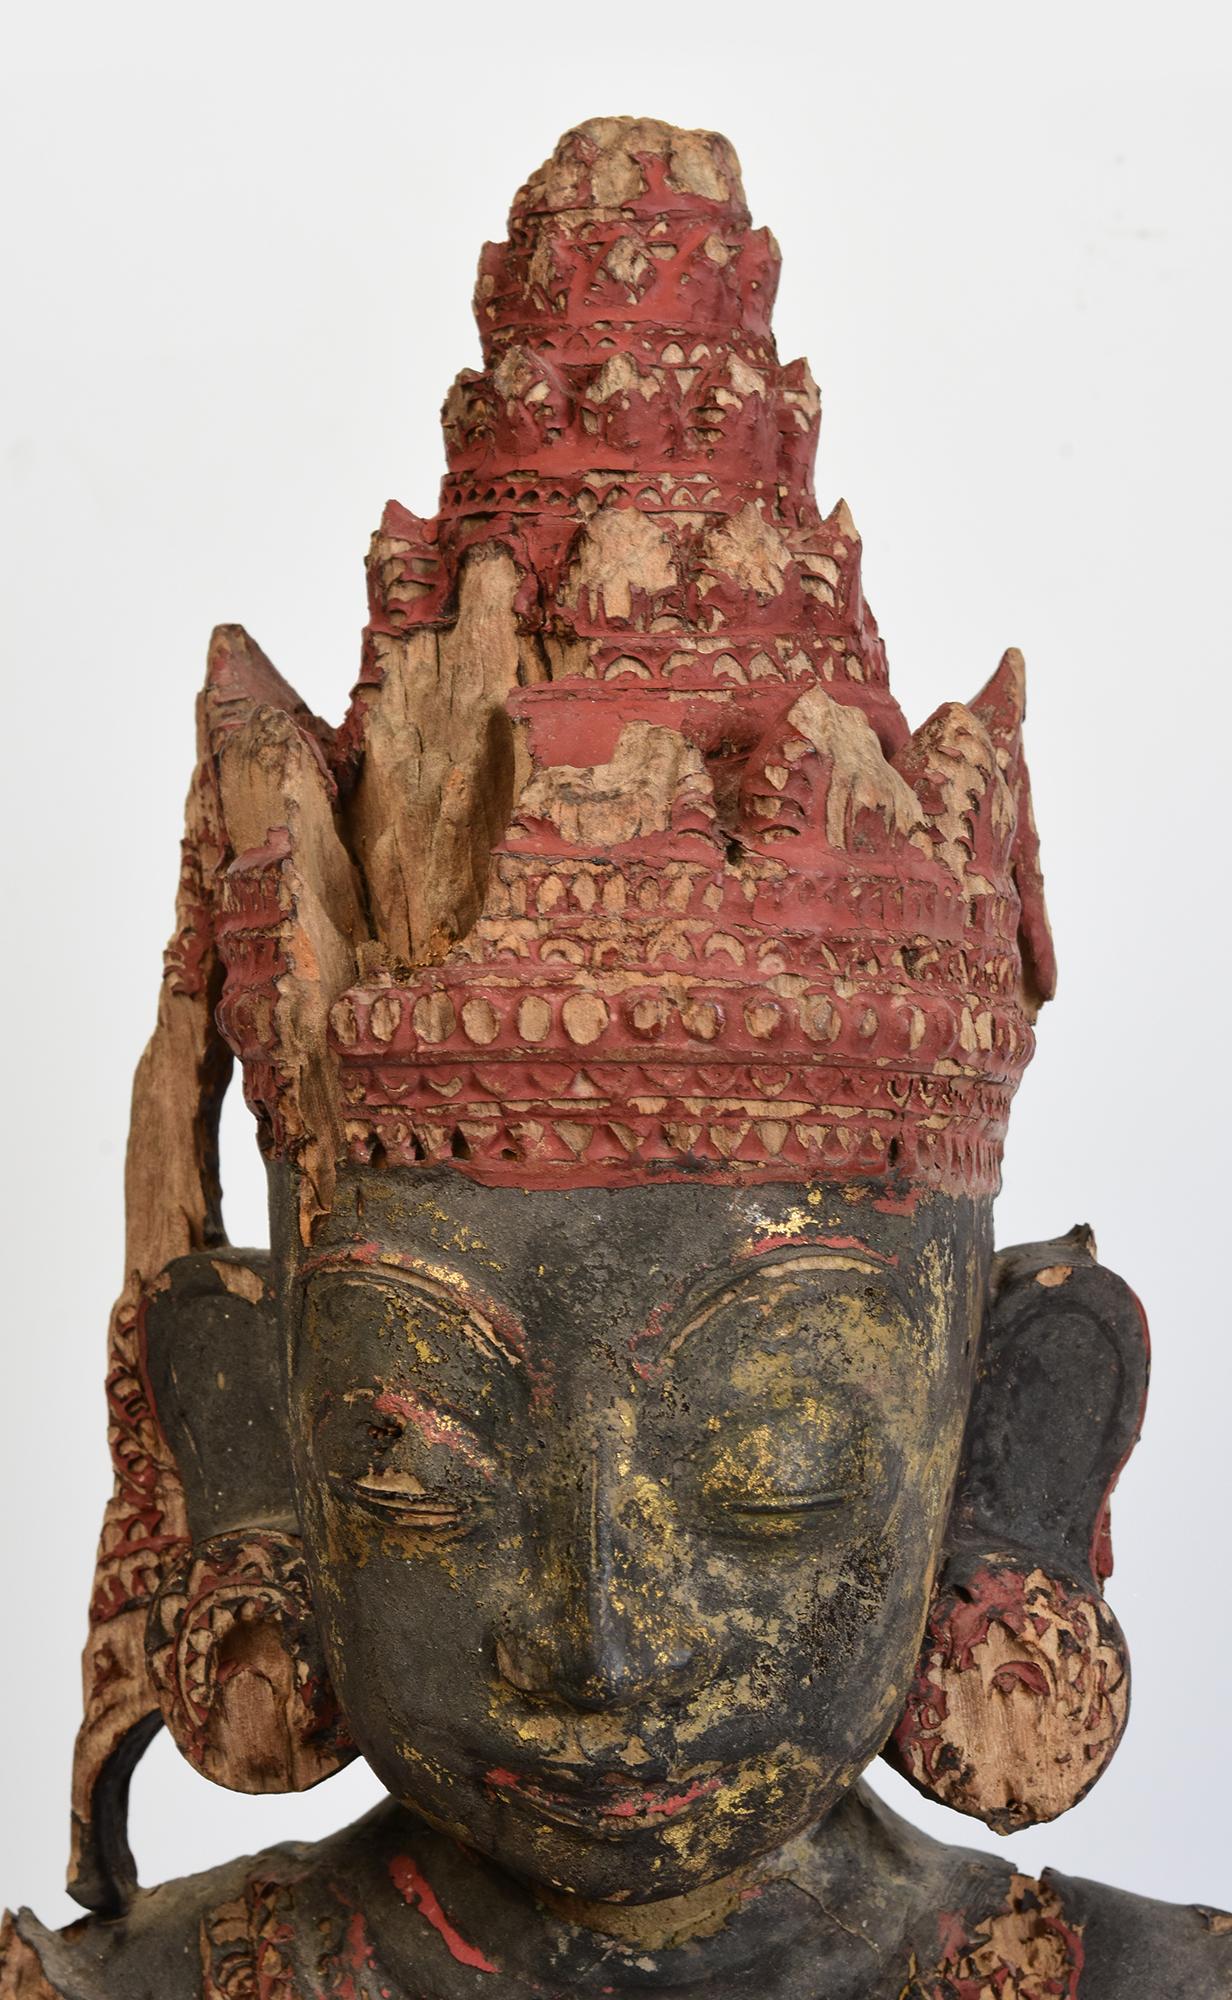 Rare antique Burmese wooden seated crowned Buddha, or sometimes known as 'King Buddha', wearing diadem-crowns and ornaments of king instead of ordinary monk's robes.

Crowned Buddha represents the Buddha's role as a universal sovereign. 

Age: